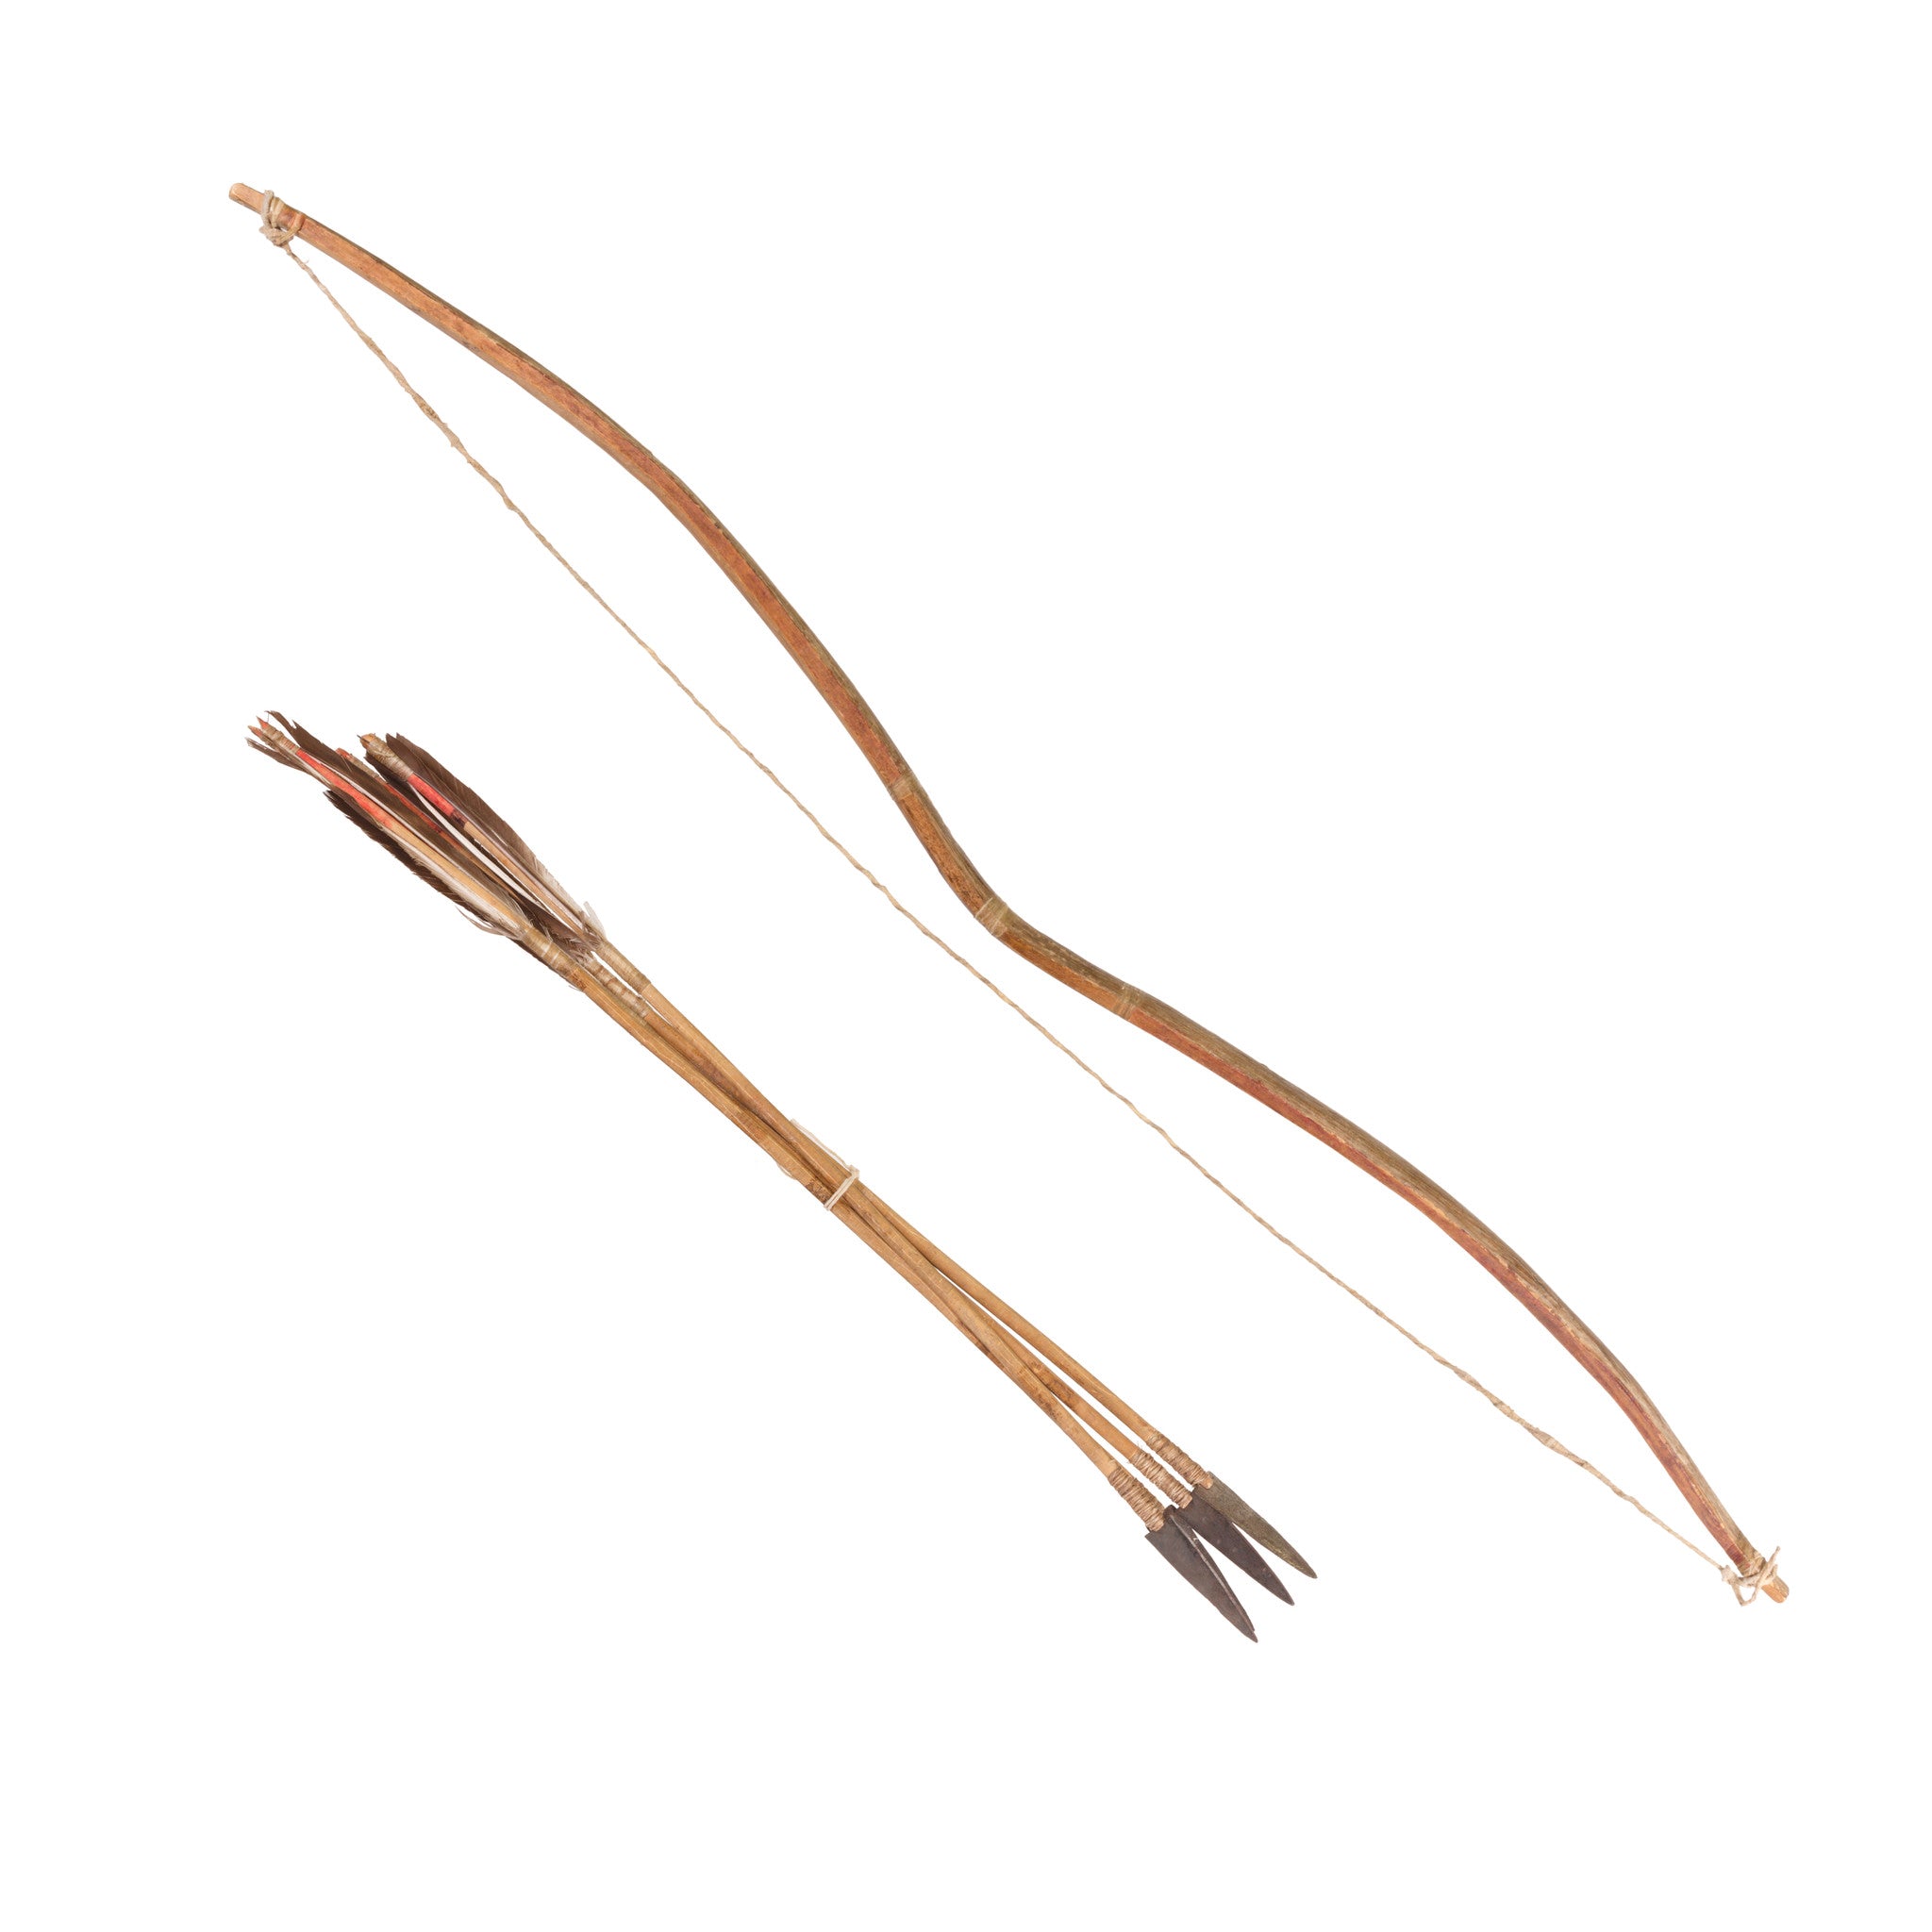 Sinew Backed Bow, Native, Weapon, Bow and Arrow